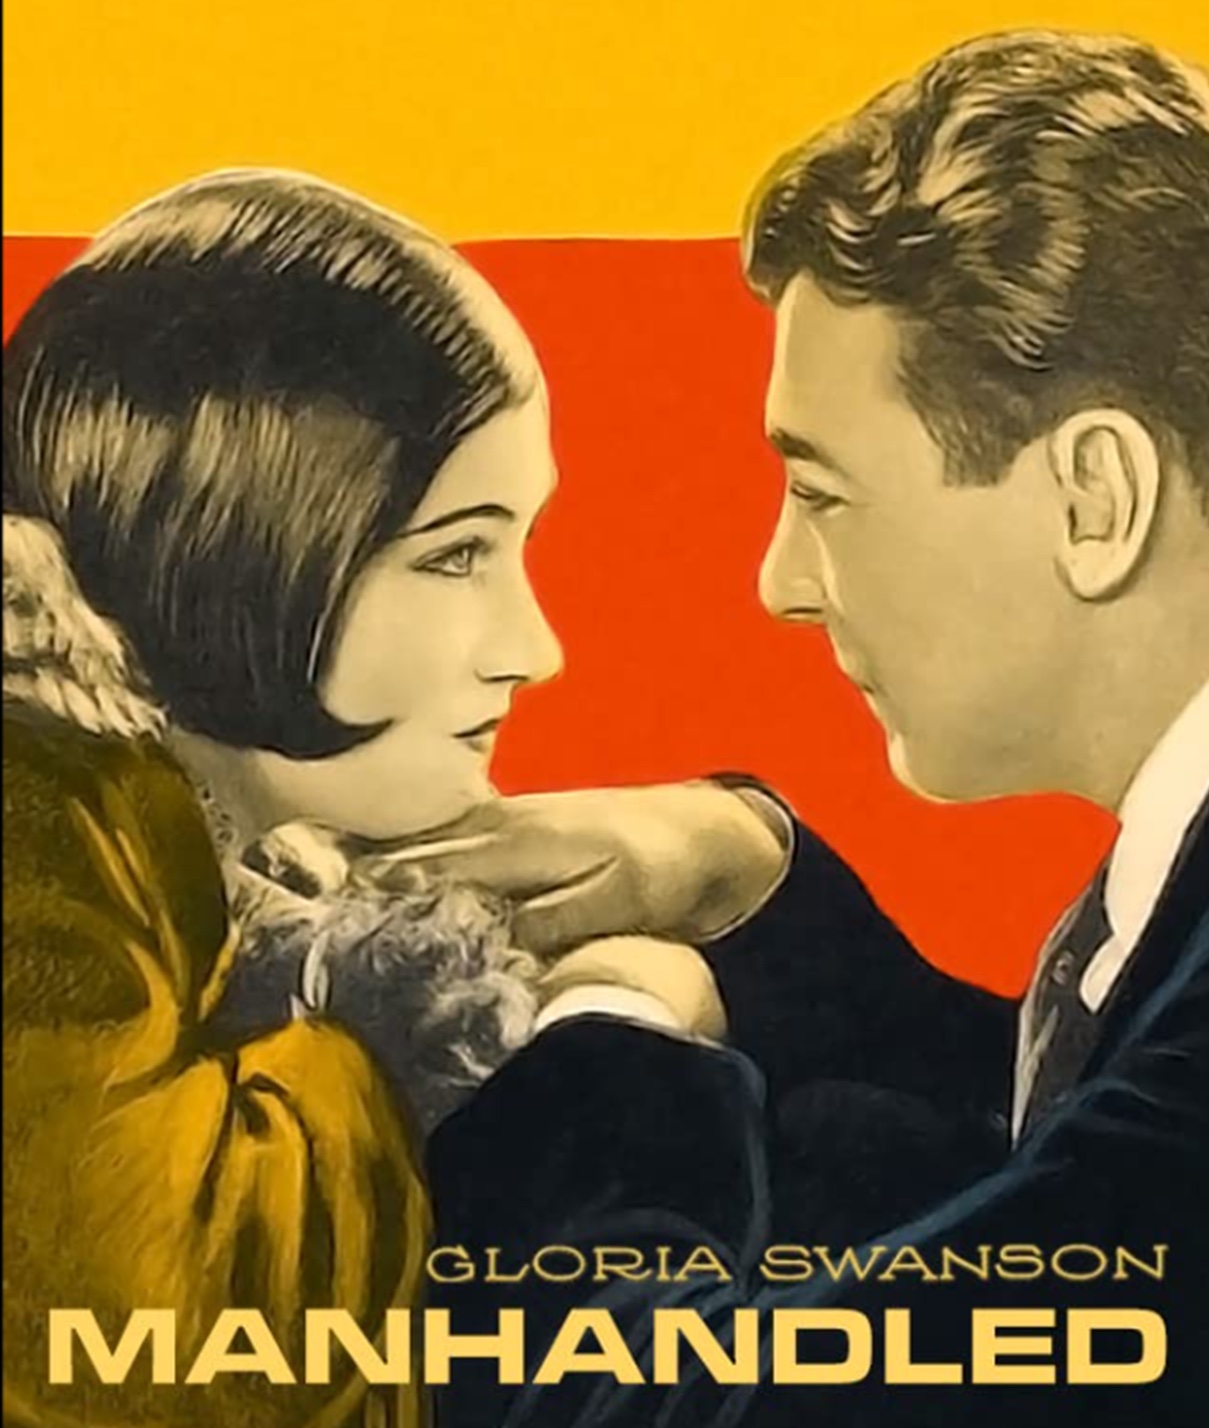 Manhandled movie poster - Yellow and Red Background with couple holding hands, text reads Gloria Swanson Manhandled